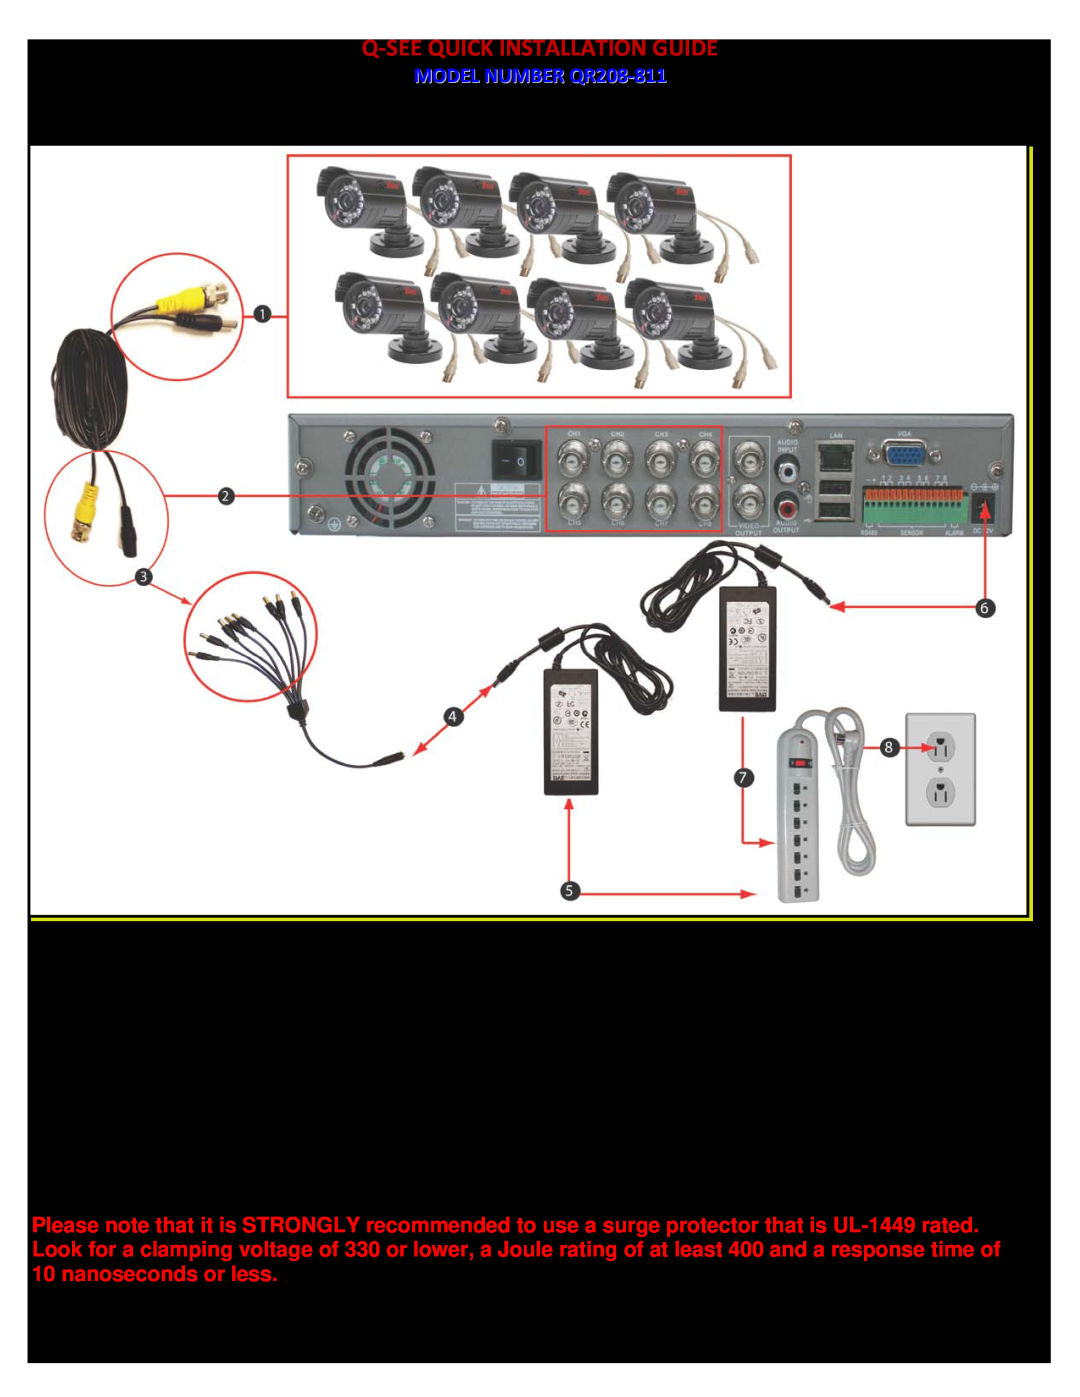 Q-See manual PART 2 - DVR CAMERA AND POWER CONNECTIONS, P a g e, Q-Seequick Installation Guide, MODEL NUMBER QR208-811 